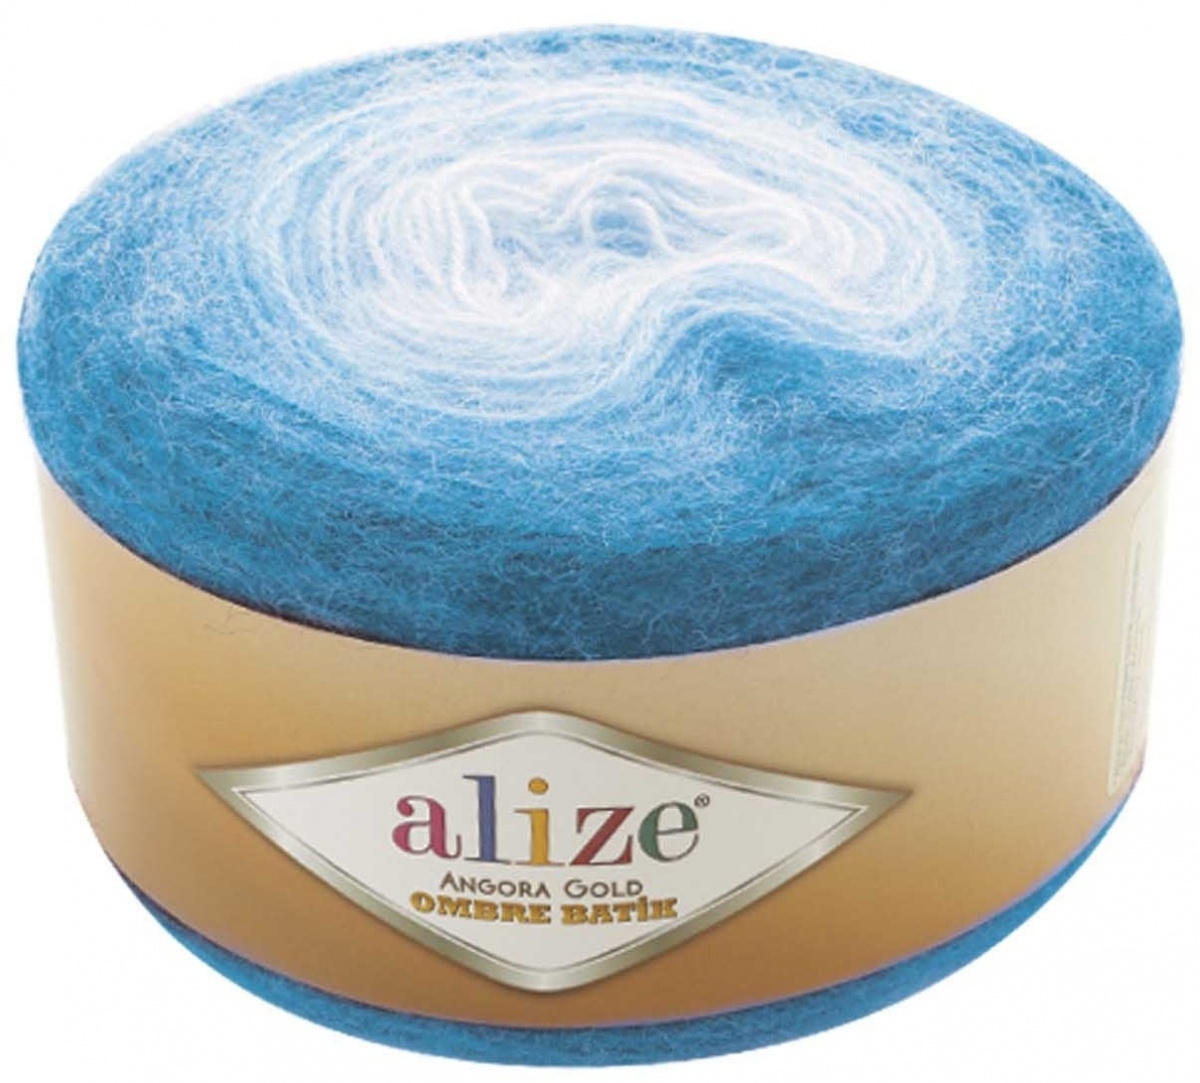 Alize Angora Gold Ombre Batik, 20% Wool, 80% Acrylic 4 Skein Value Pack, 600g фото 5